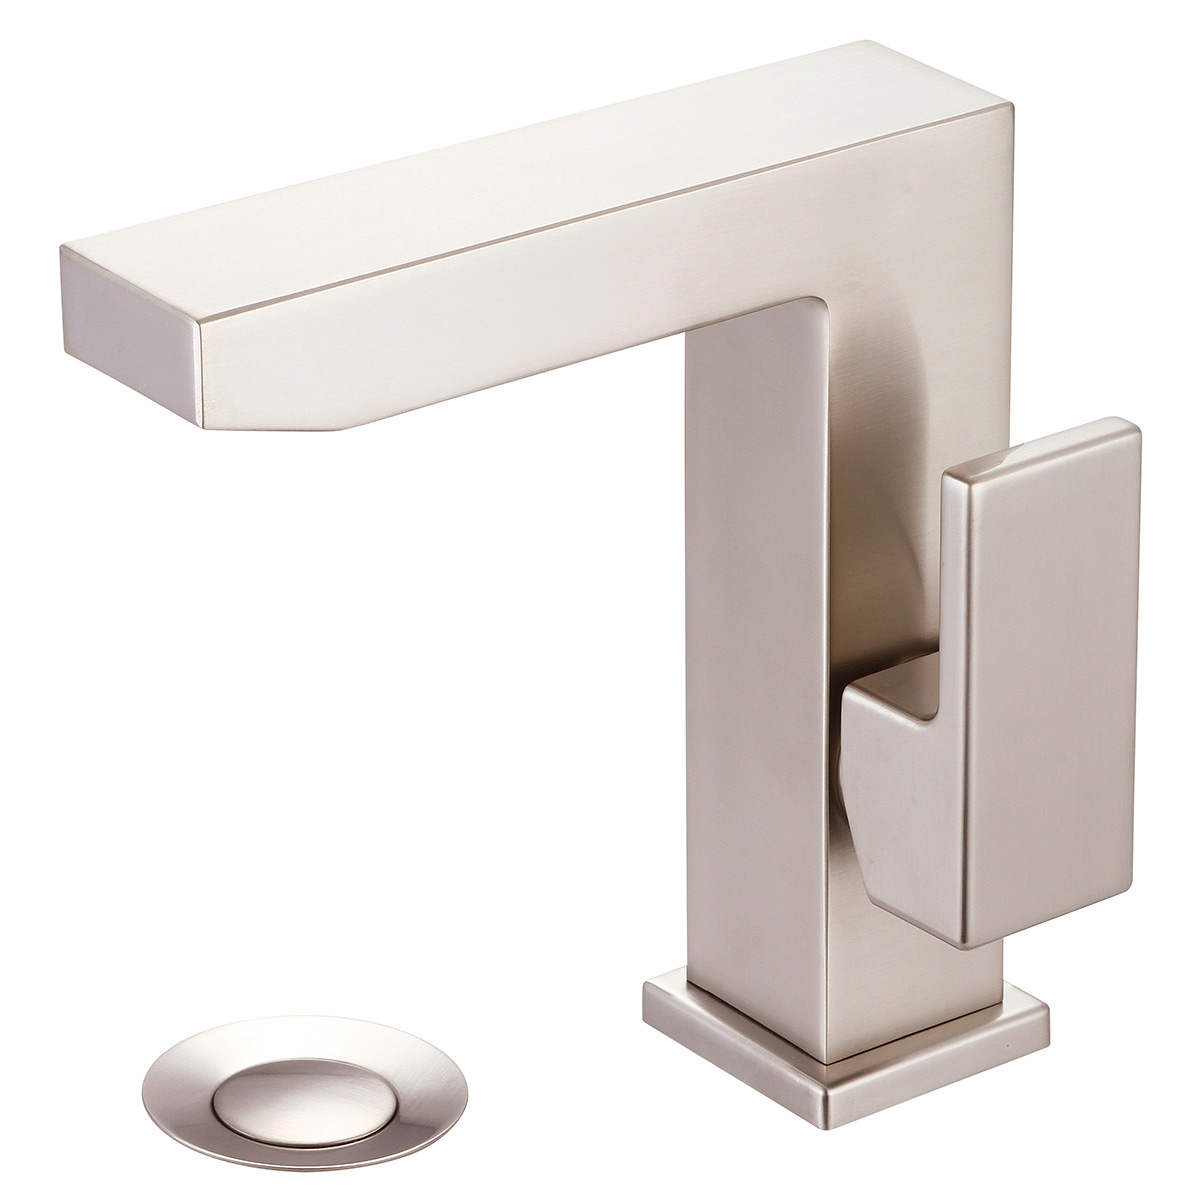 Mod 3mo180-bn 4.87 In. Single Handle Lavatory Faucet - Brushed Nickel